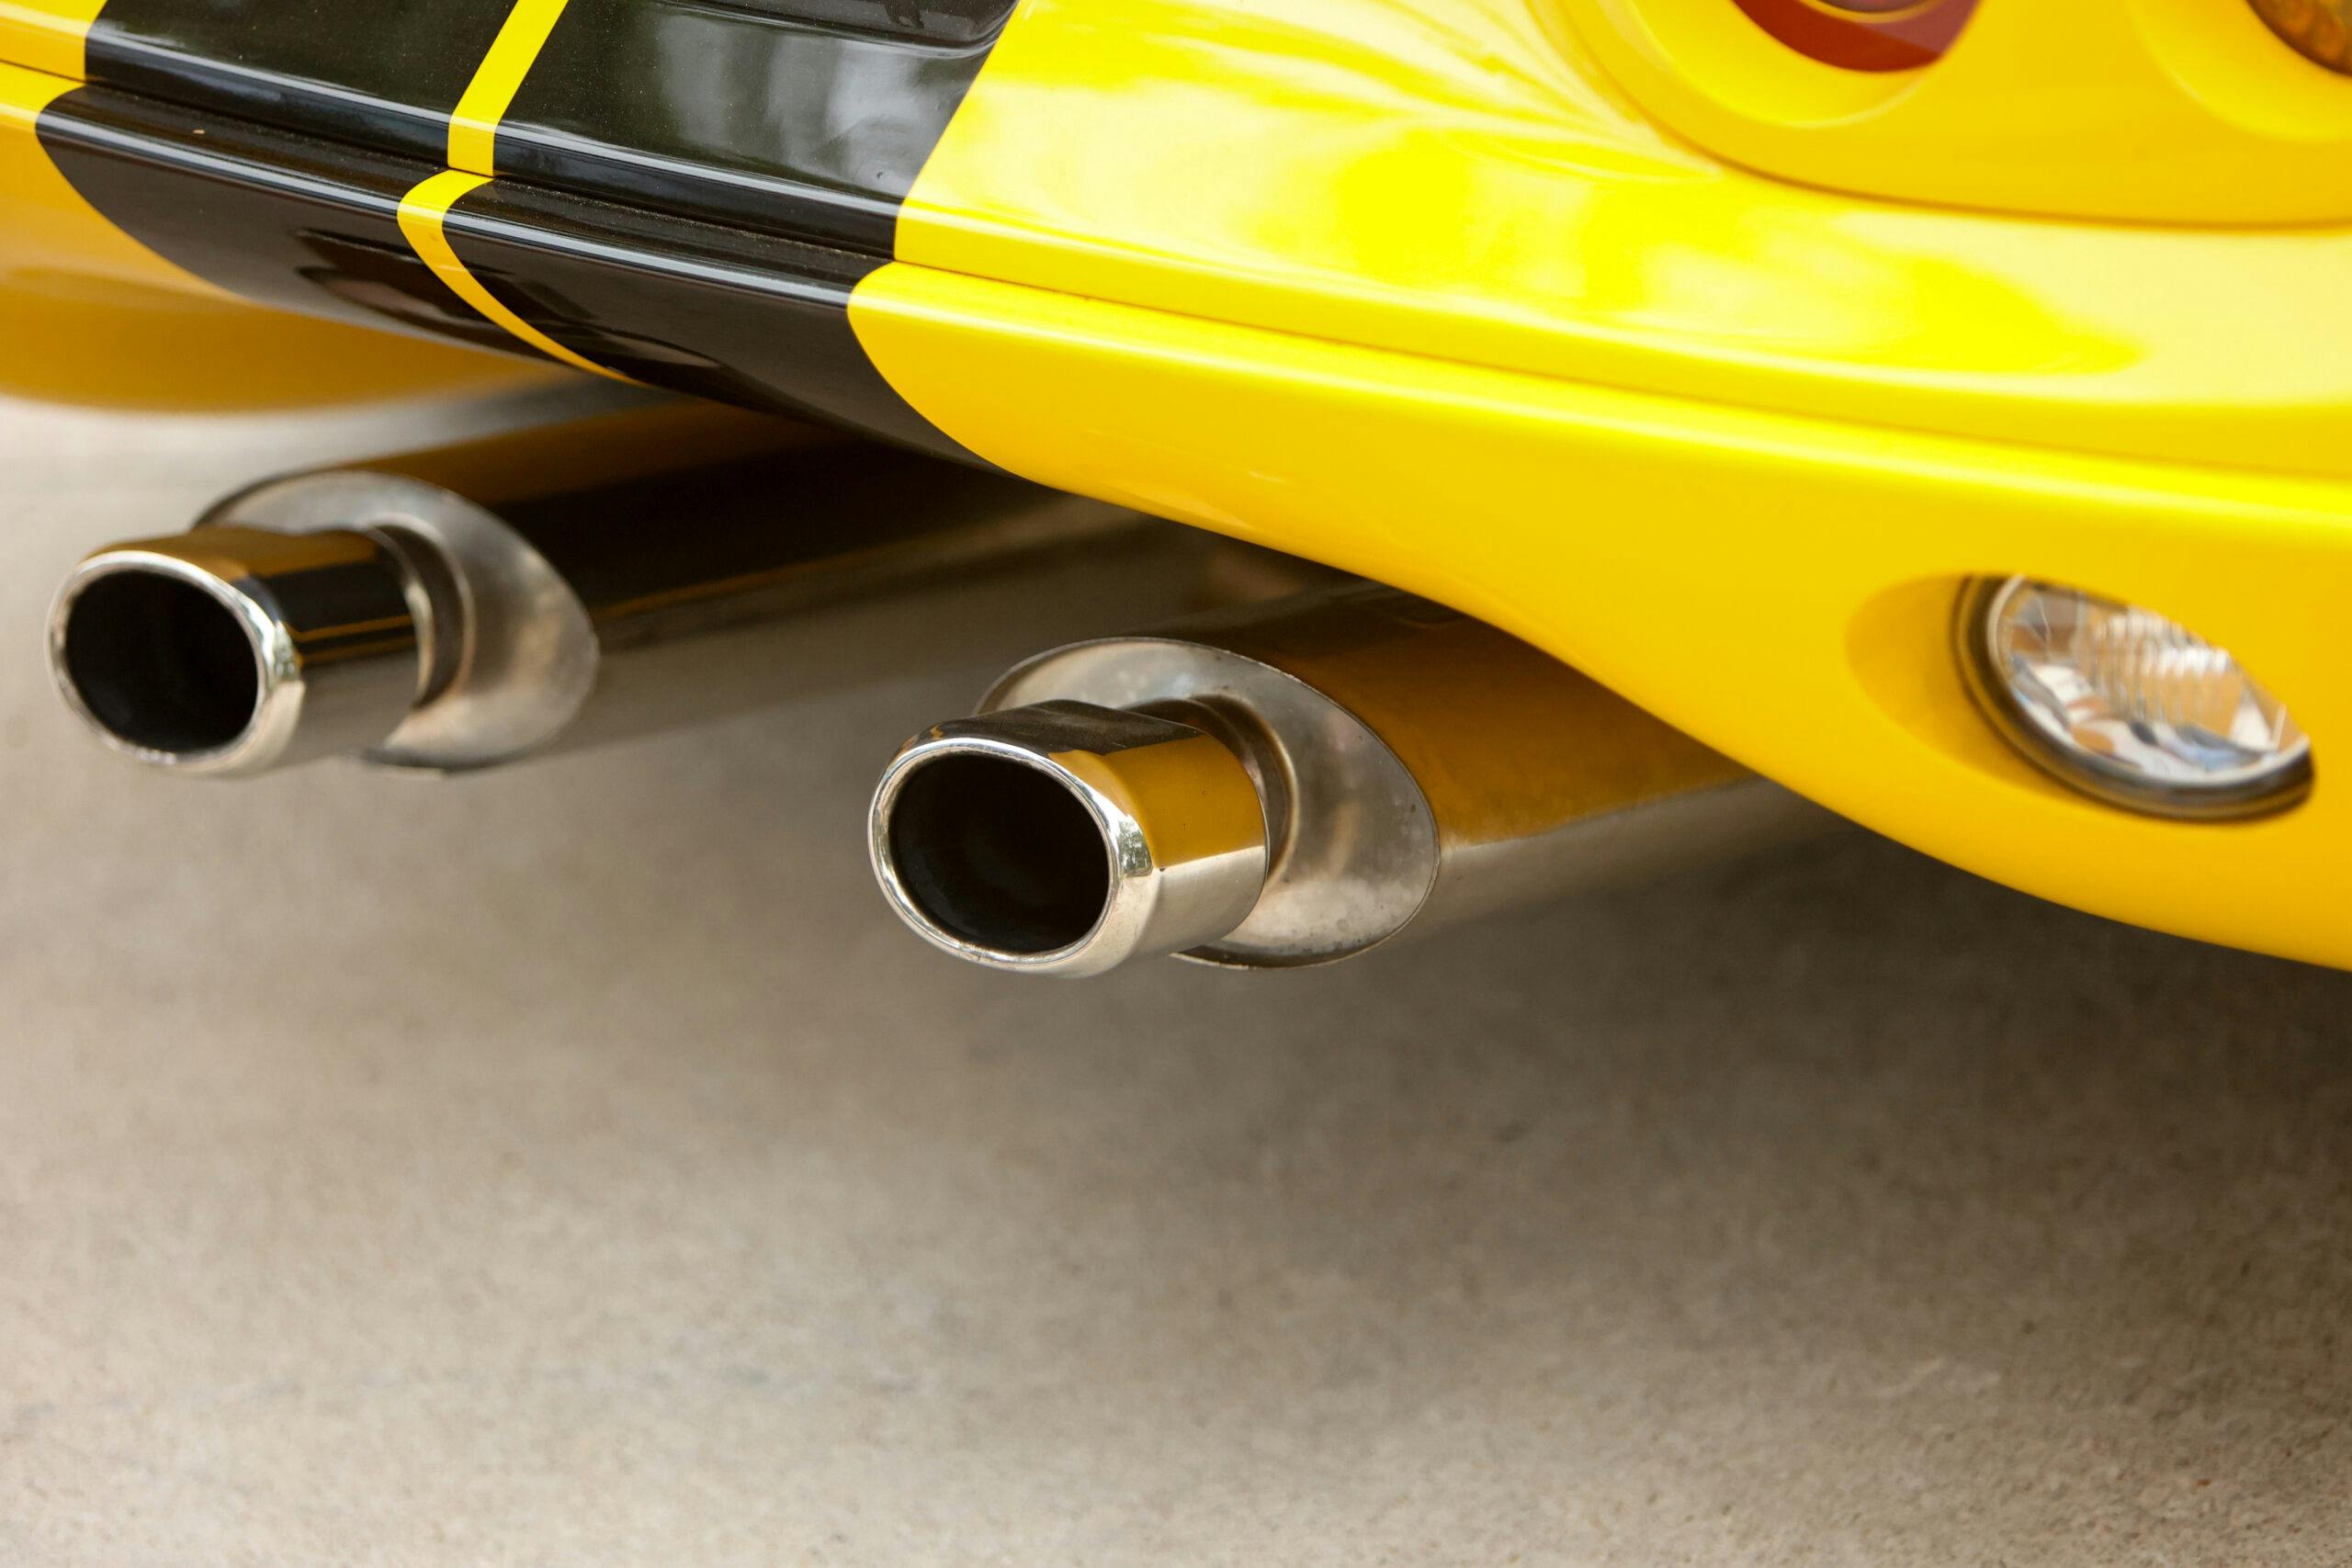 1999 Shelby Series 1 tailpipes